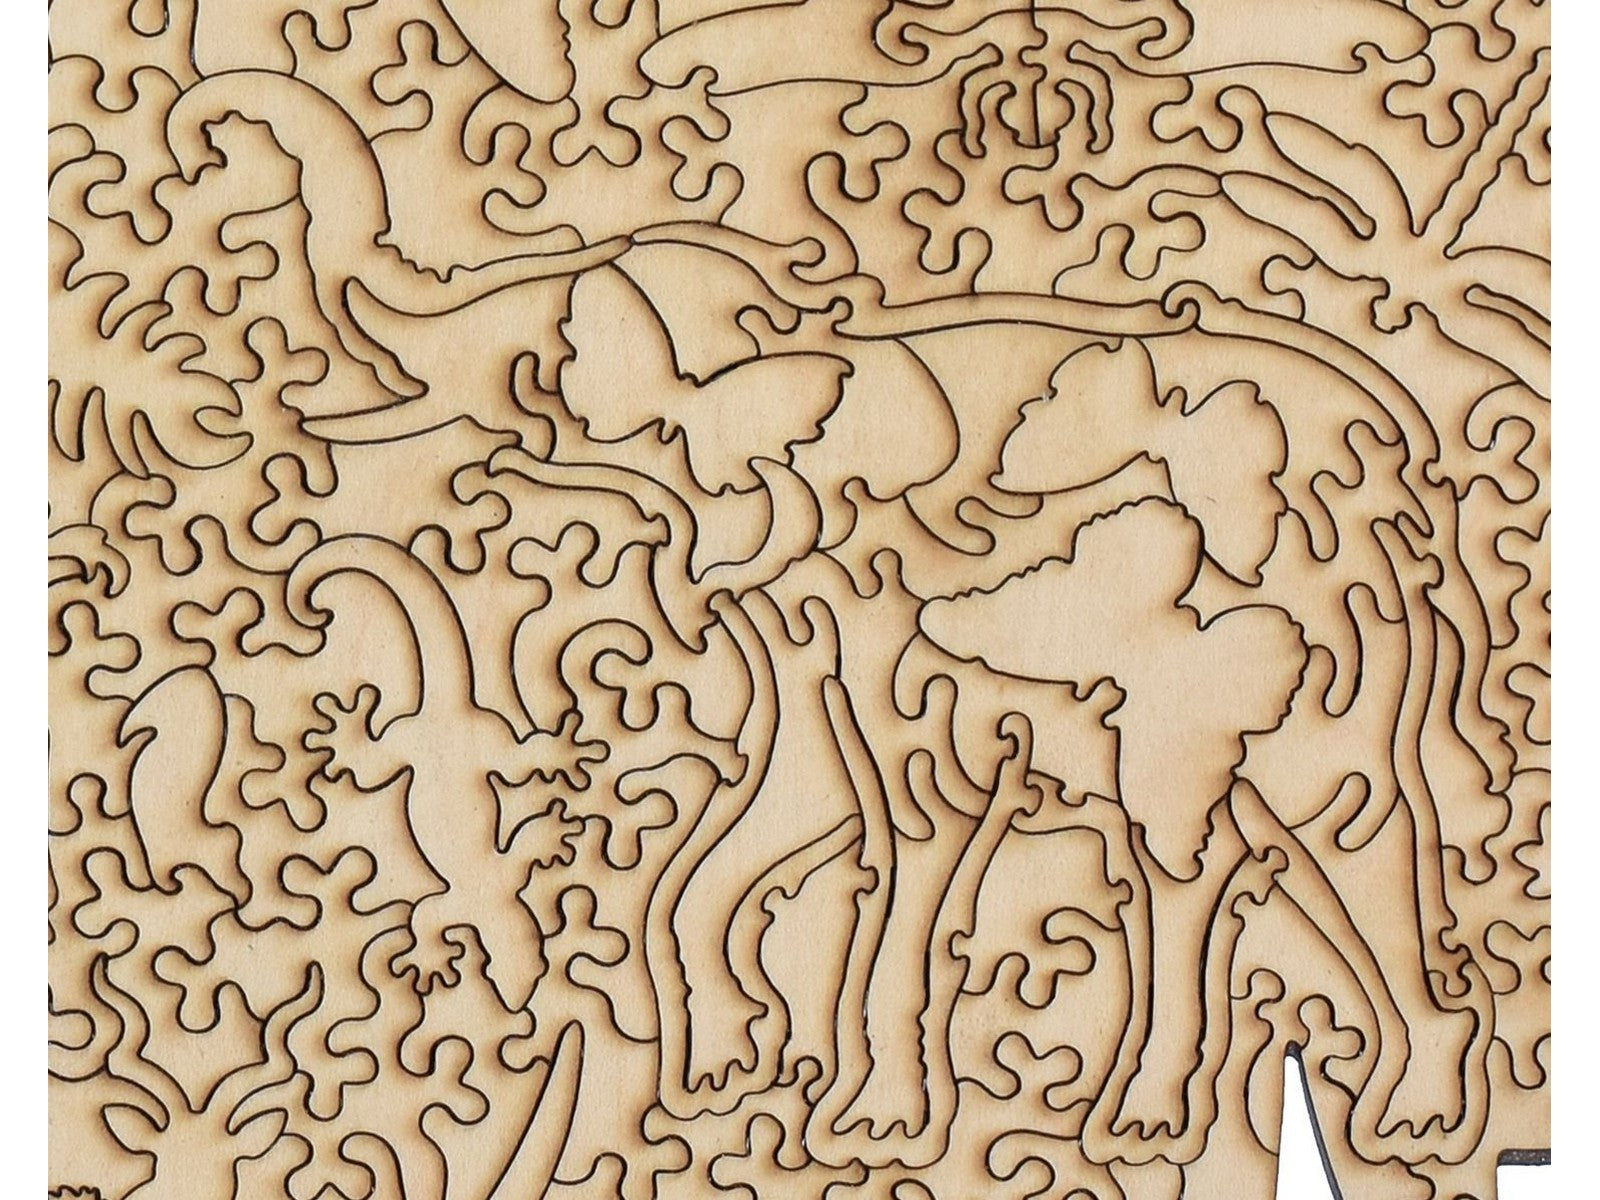 A closeup of the back of the puzzle, Mabula Elephant, showing the detail in the pieces.